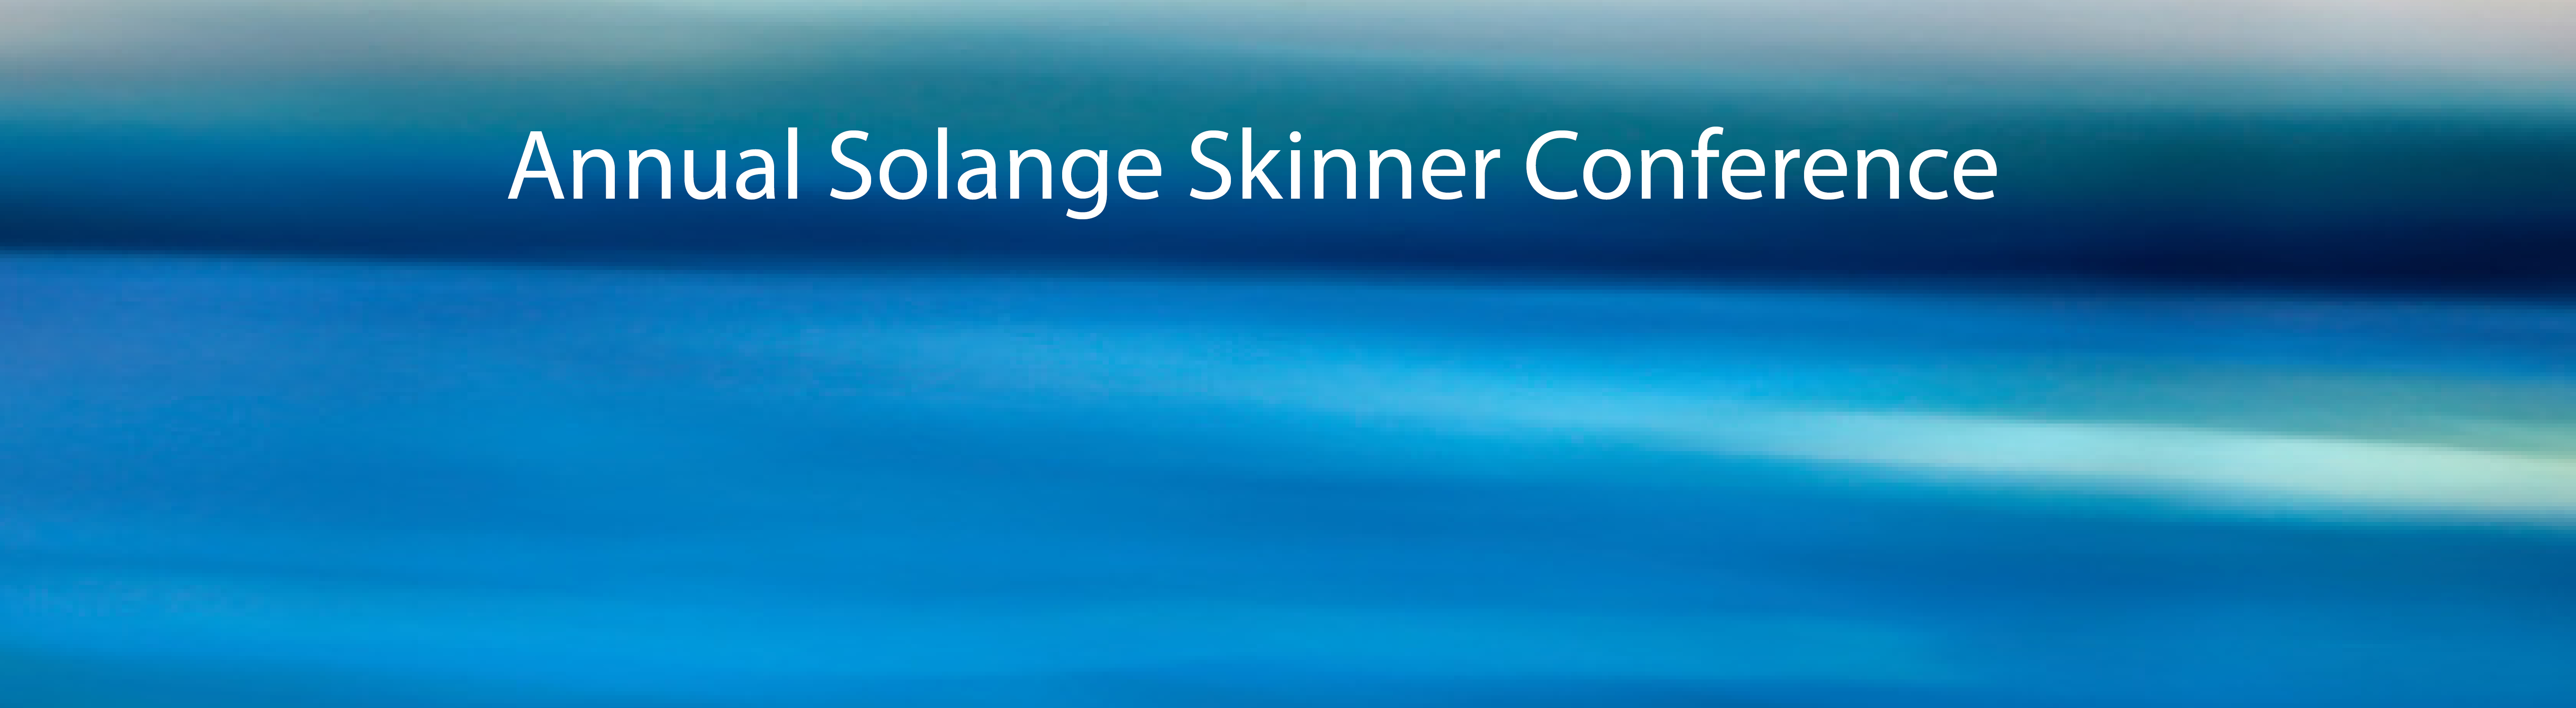 Fourth Annual Solange Skinner Conference